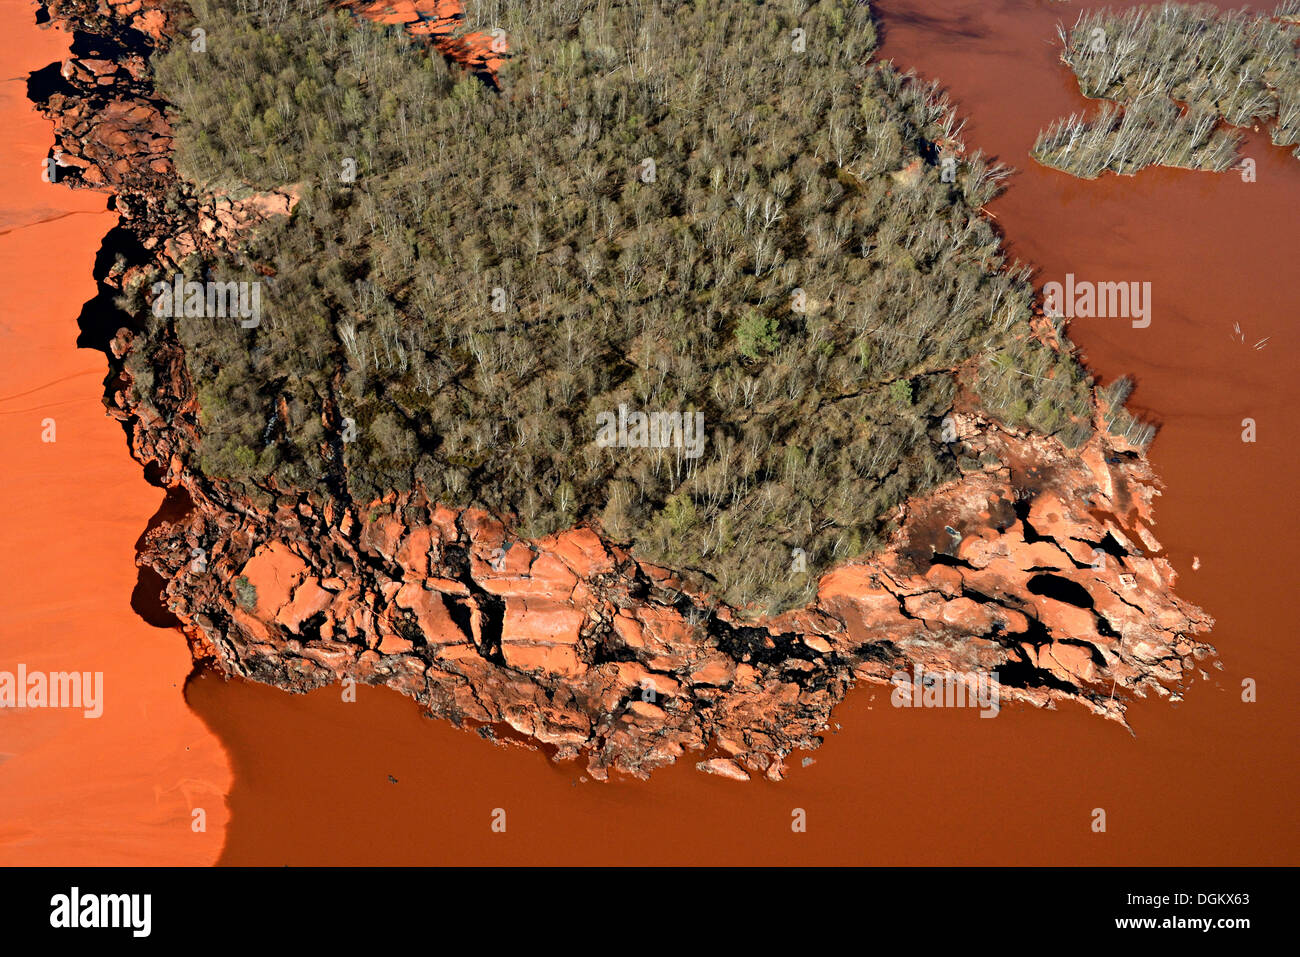 Aerial view, red mud or red sludge deposits, Stade, Stade, Lower Saxony, Germany Stock Photo